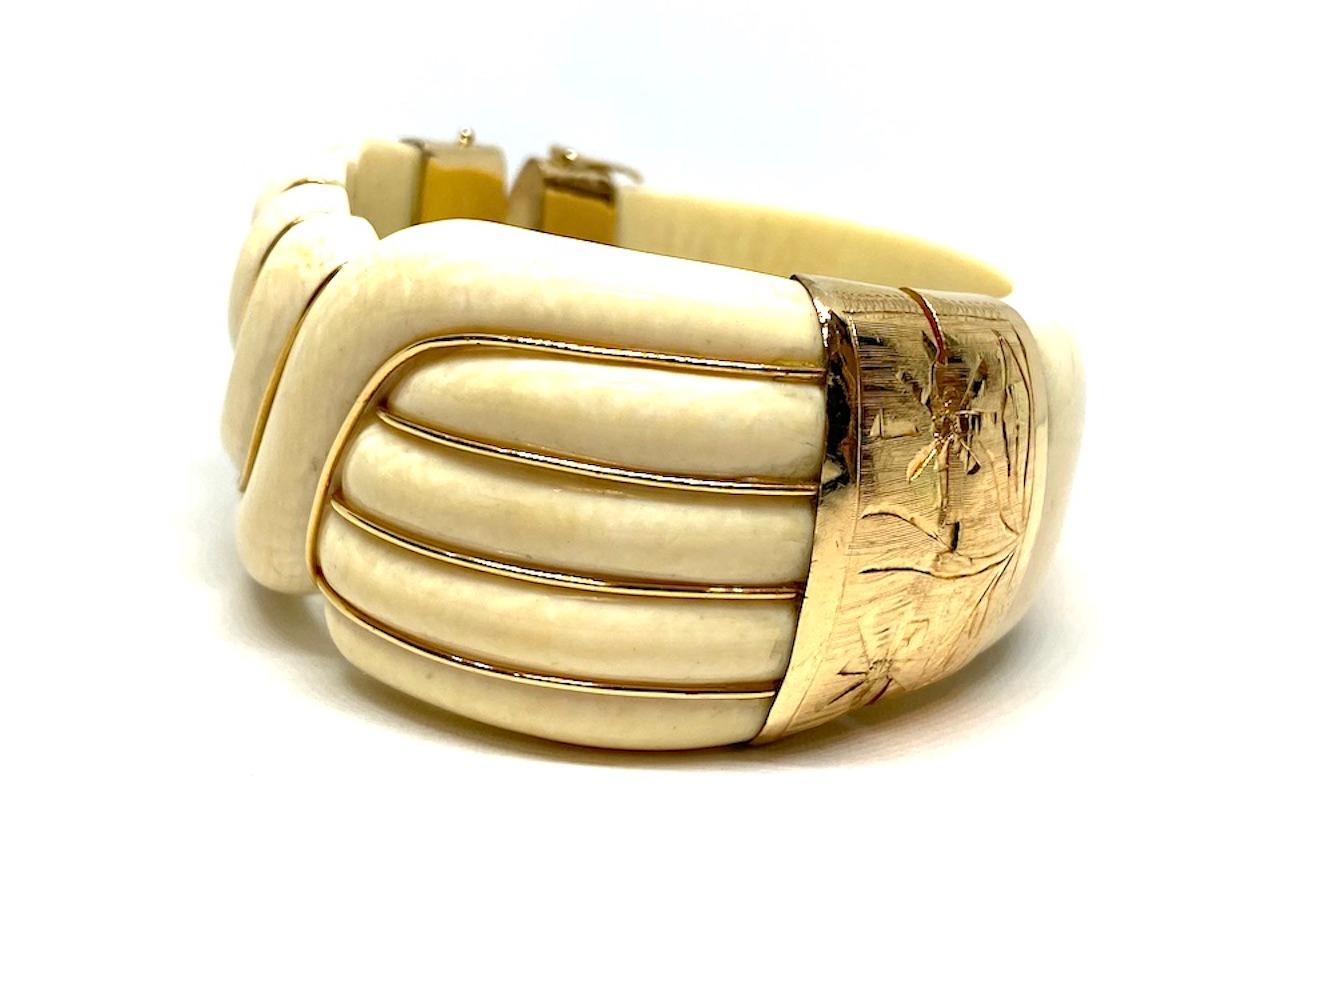 Large Ivory Bakelite Dome Bangle 14 Karat Yellow Gold
Beautiful, Convex shaped or dome style wide bangle measures 1.50